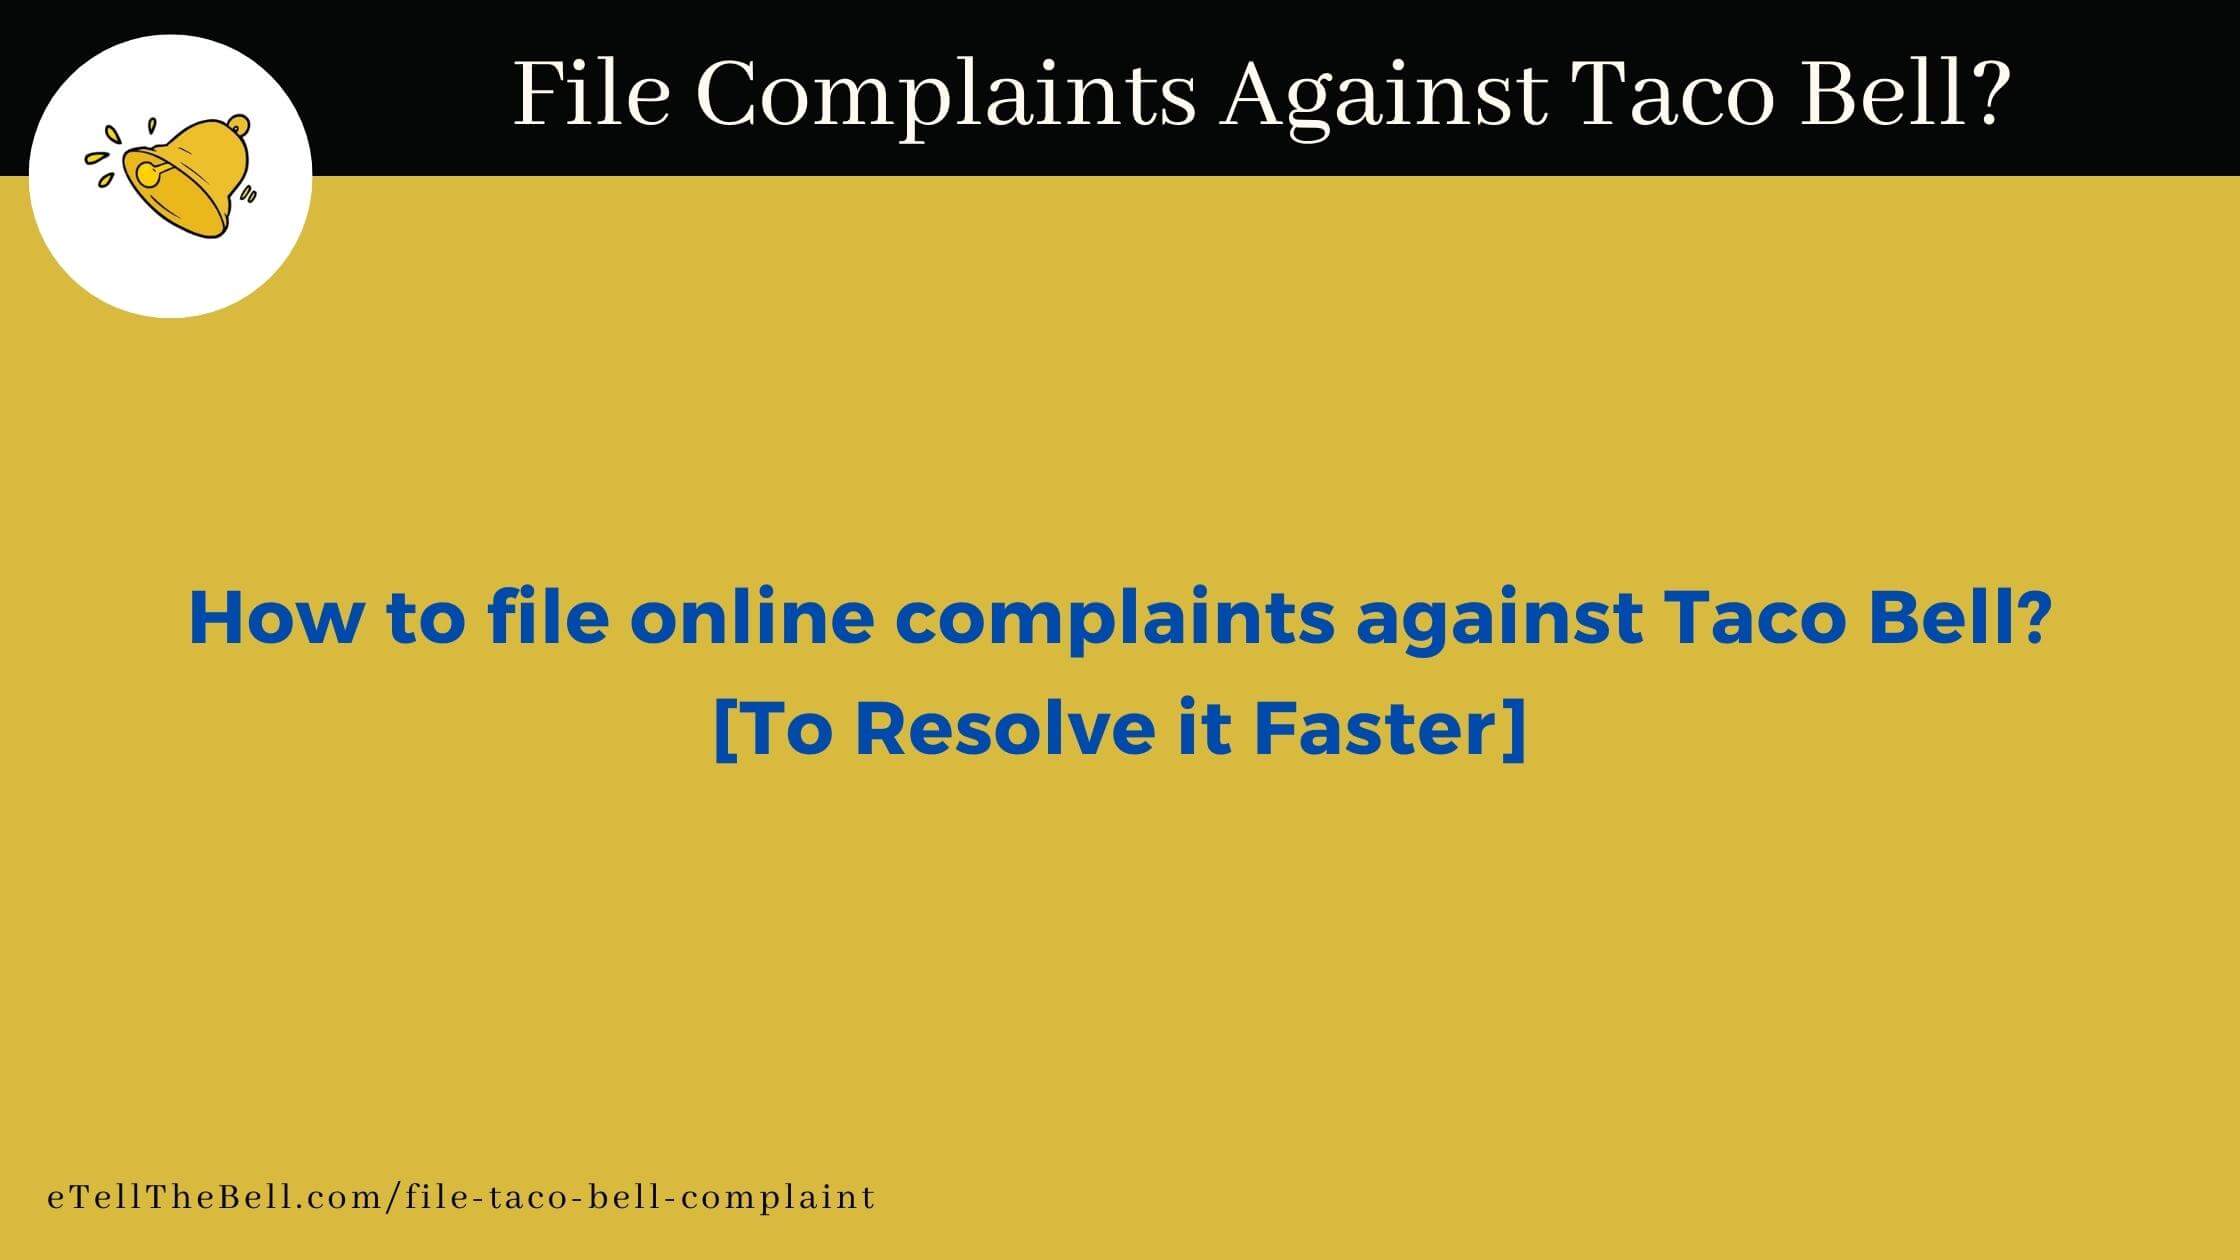 How to file online complaints against Taco Bell